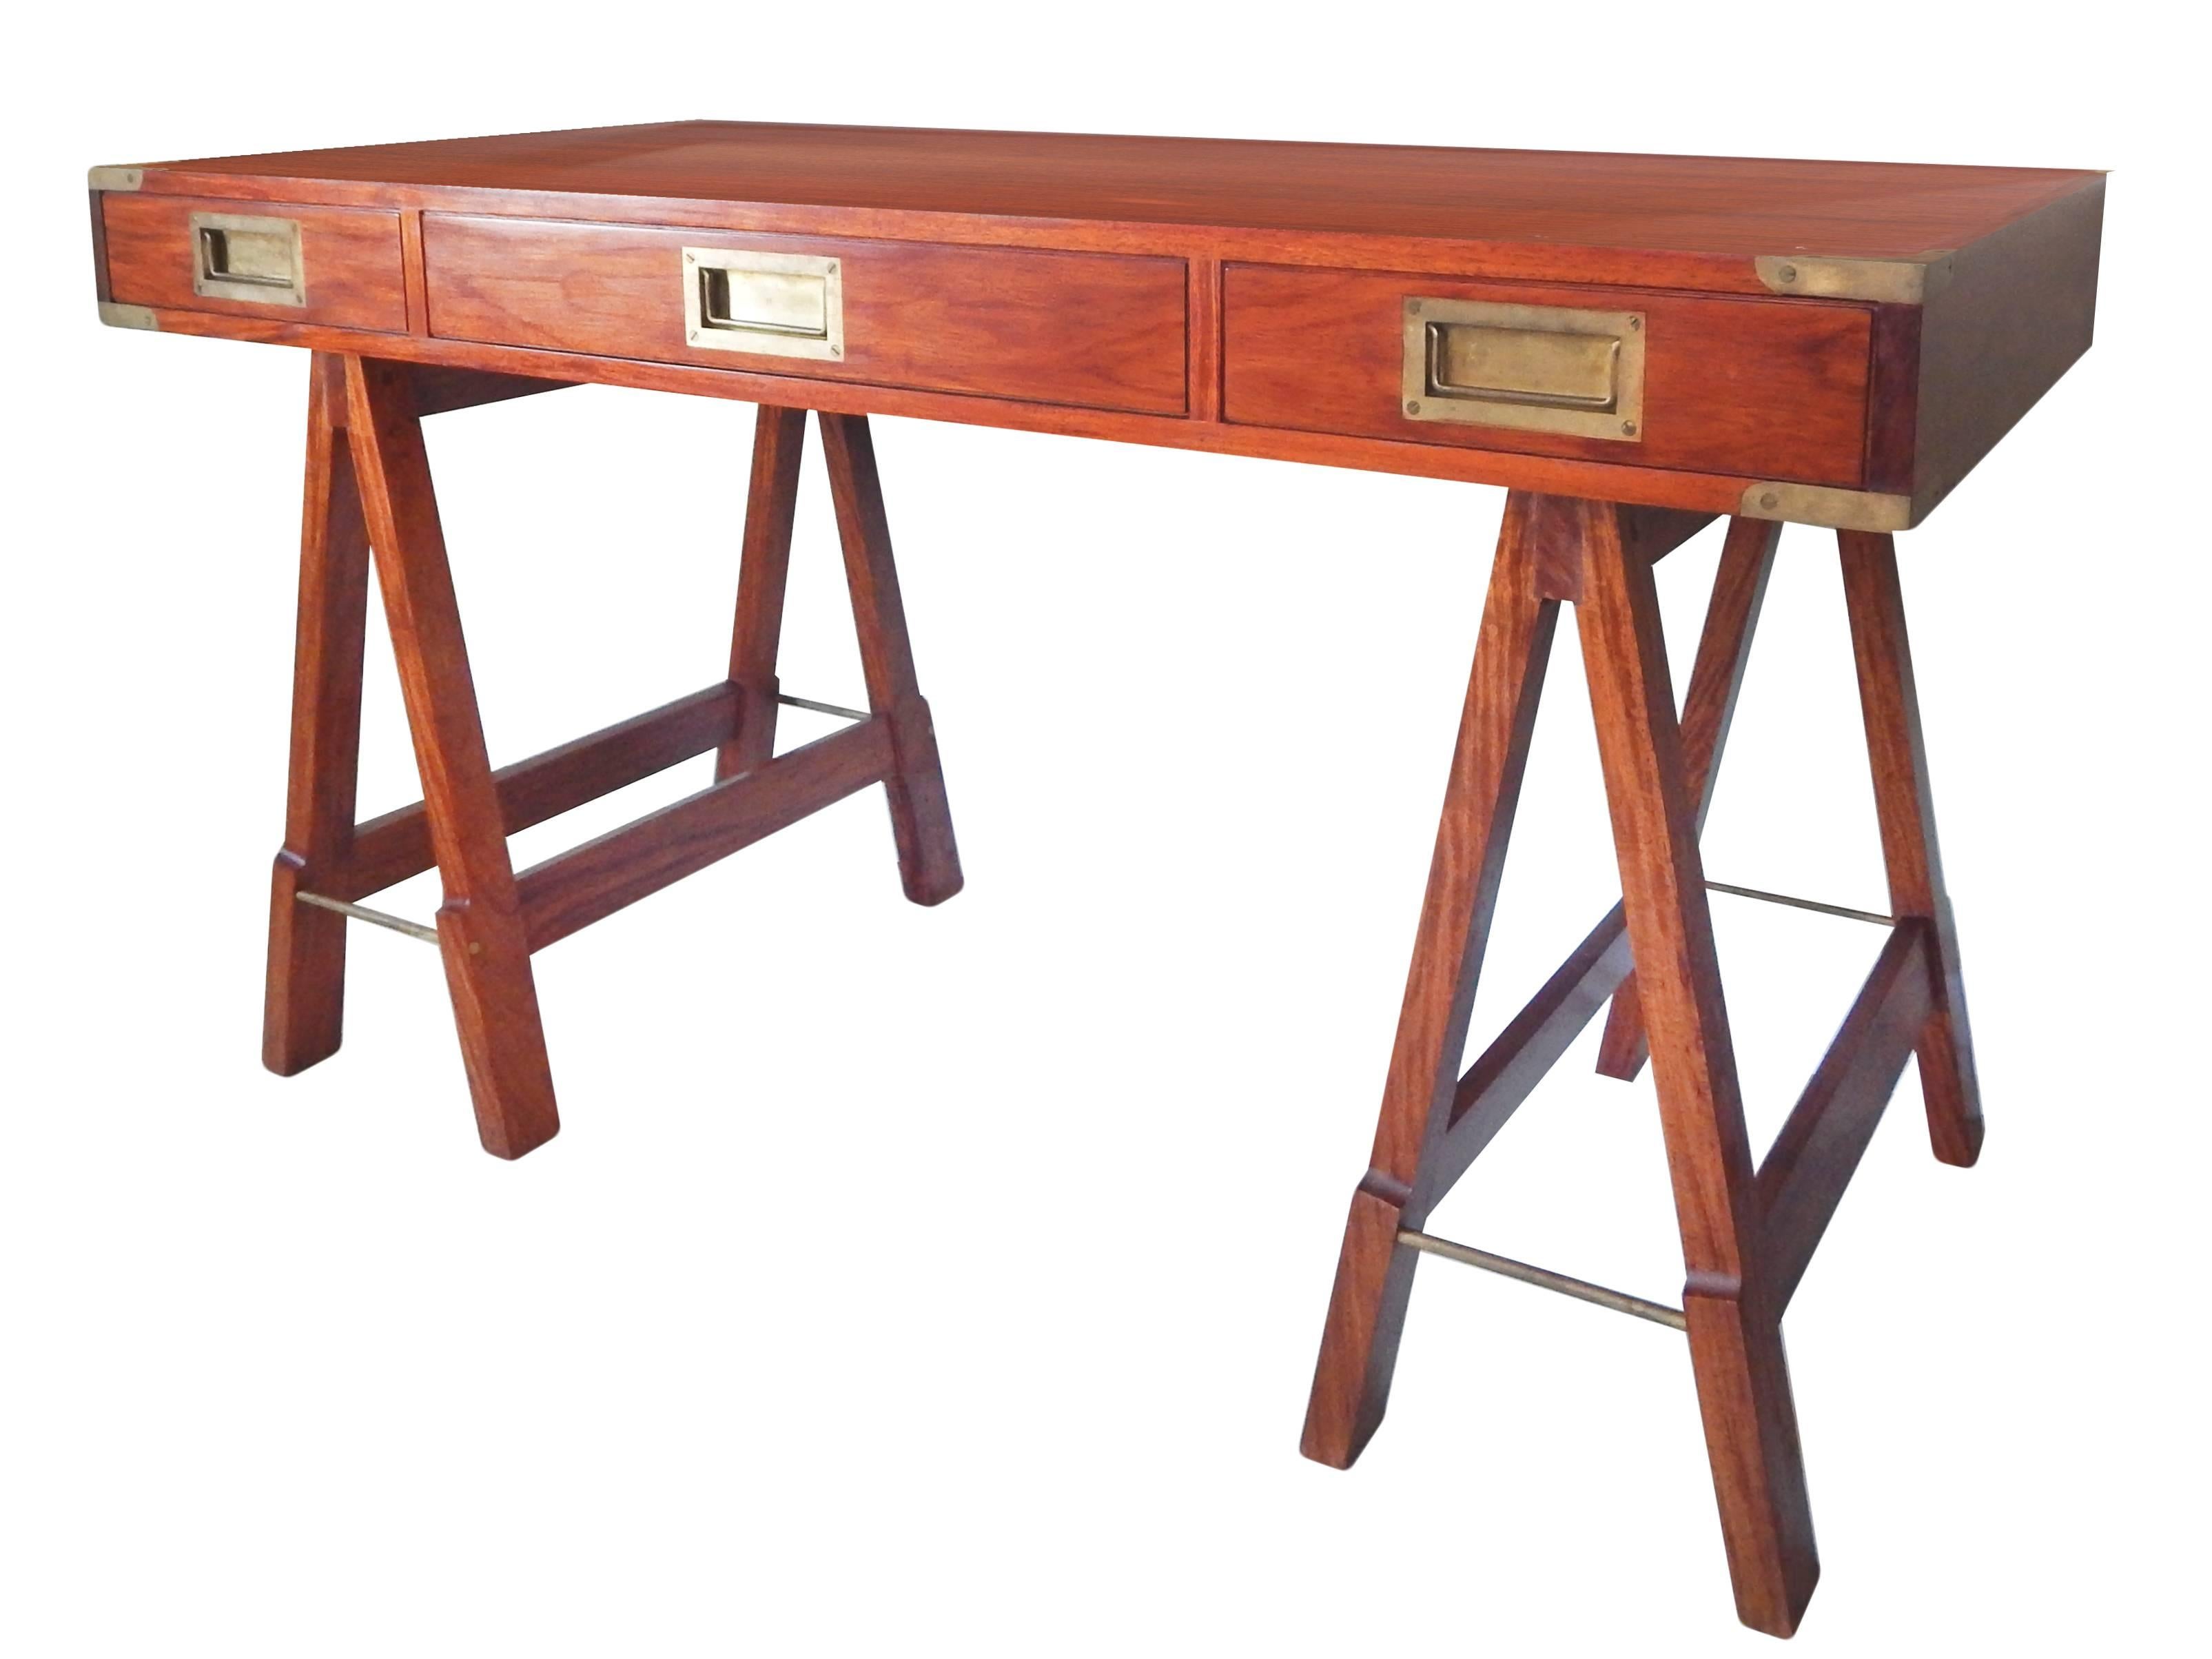 Campaign desk on saw horse style legs with high quality hardware. In excellent condition.